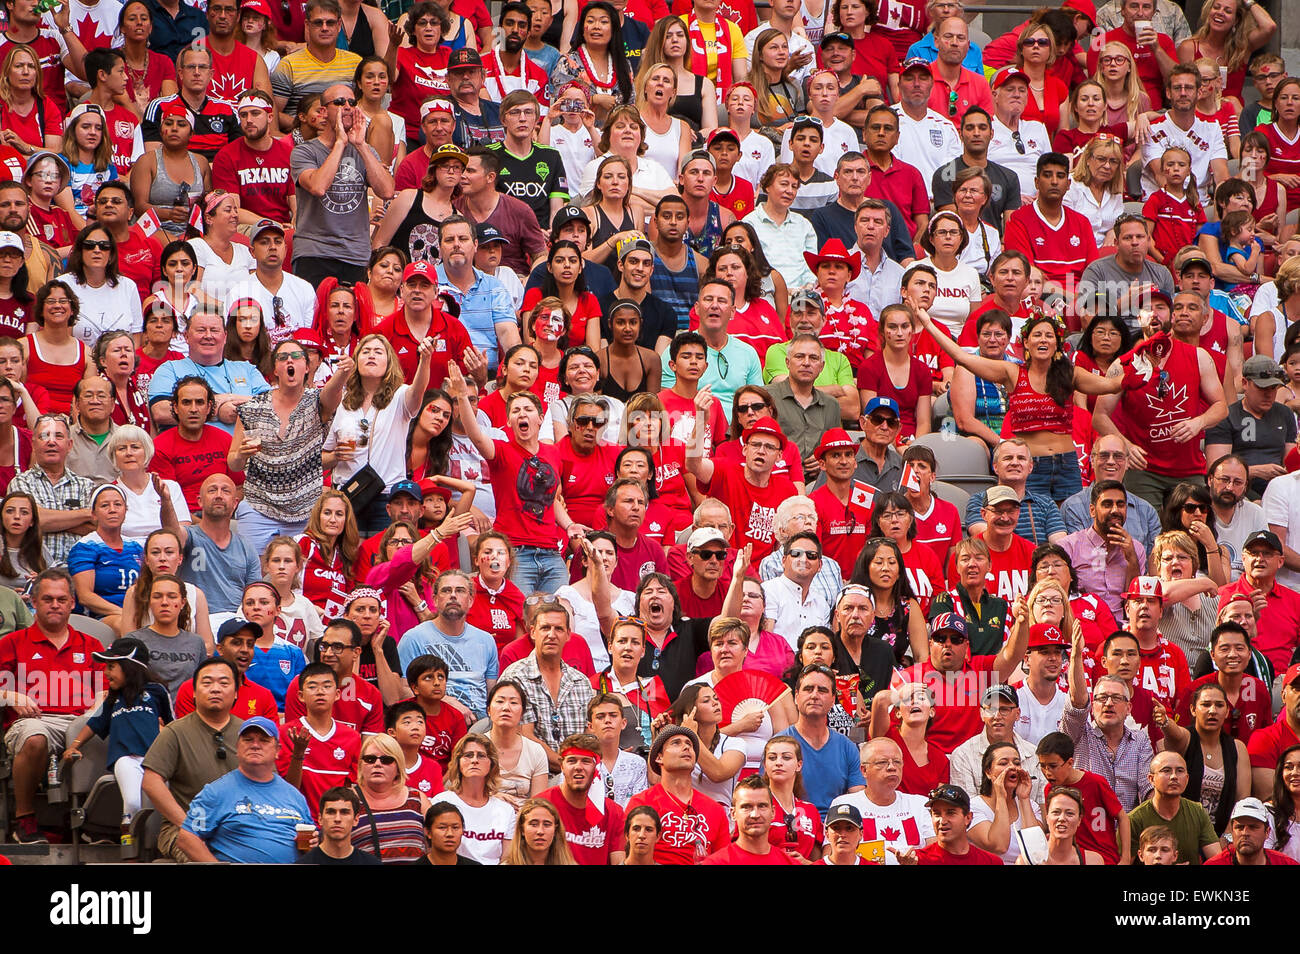 Vancouver, Canada. 27th June, 2015. Fans react to a call during the quarterfinal match between Canada and England at the FIFA Women's World Cup Canada 2015 at BC Place Stadium. England won the match 2-1. Credit:  Matt Jacques/Alamy Live News Stock Photo